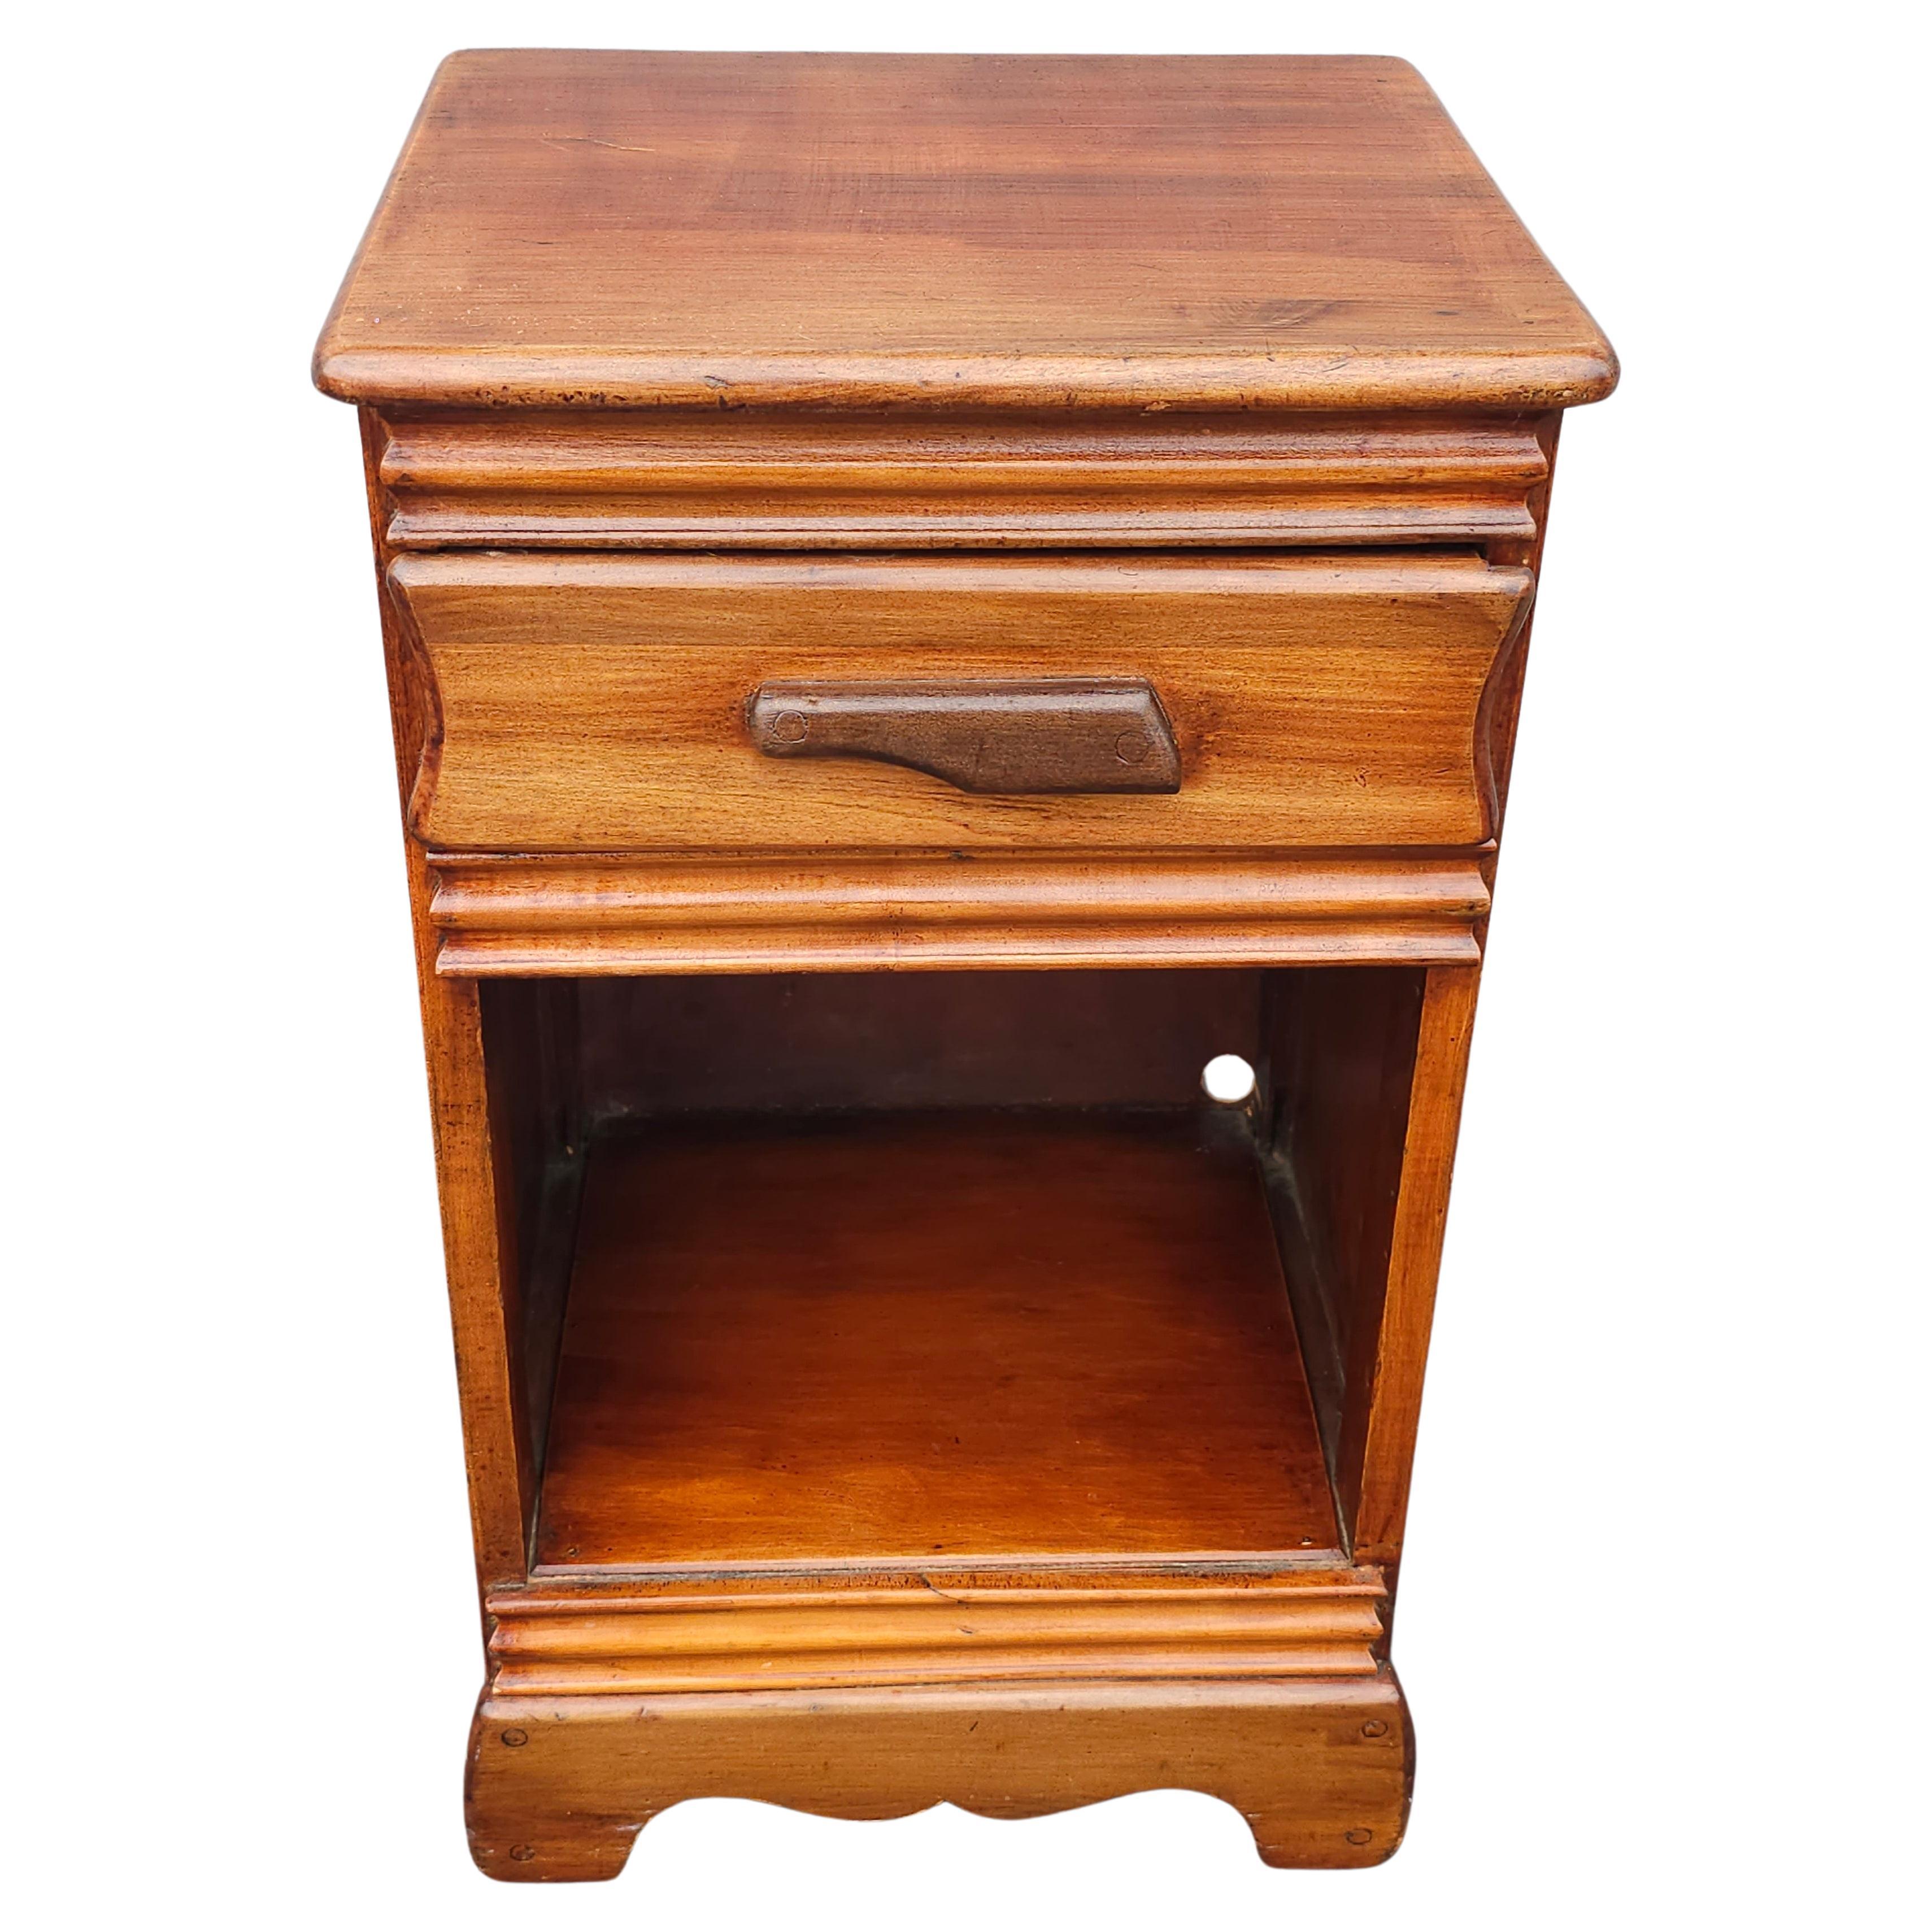 Early 20th Century Victorian Single Drawer Mahogany BedSide Table